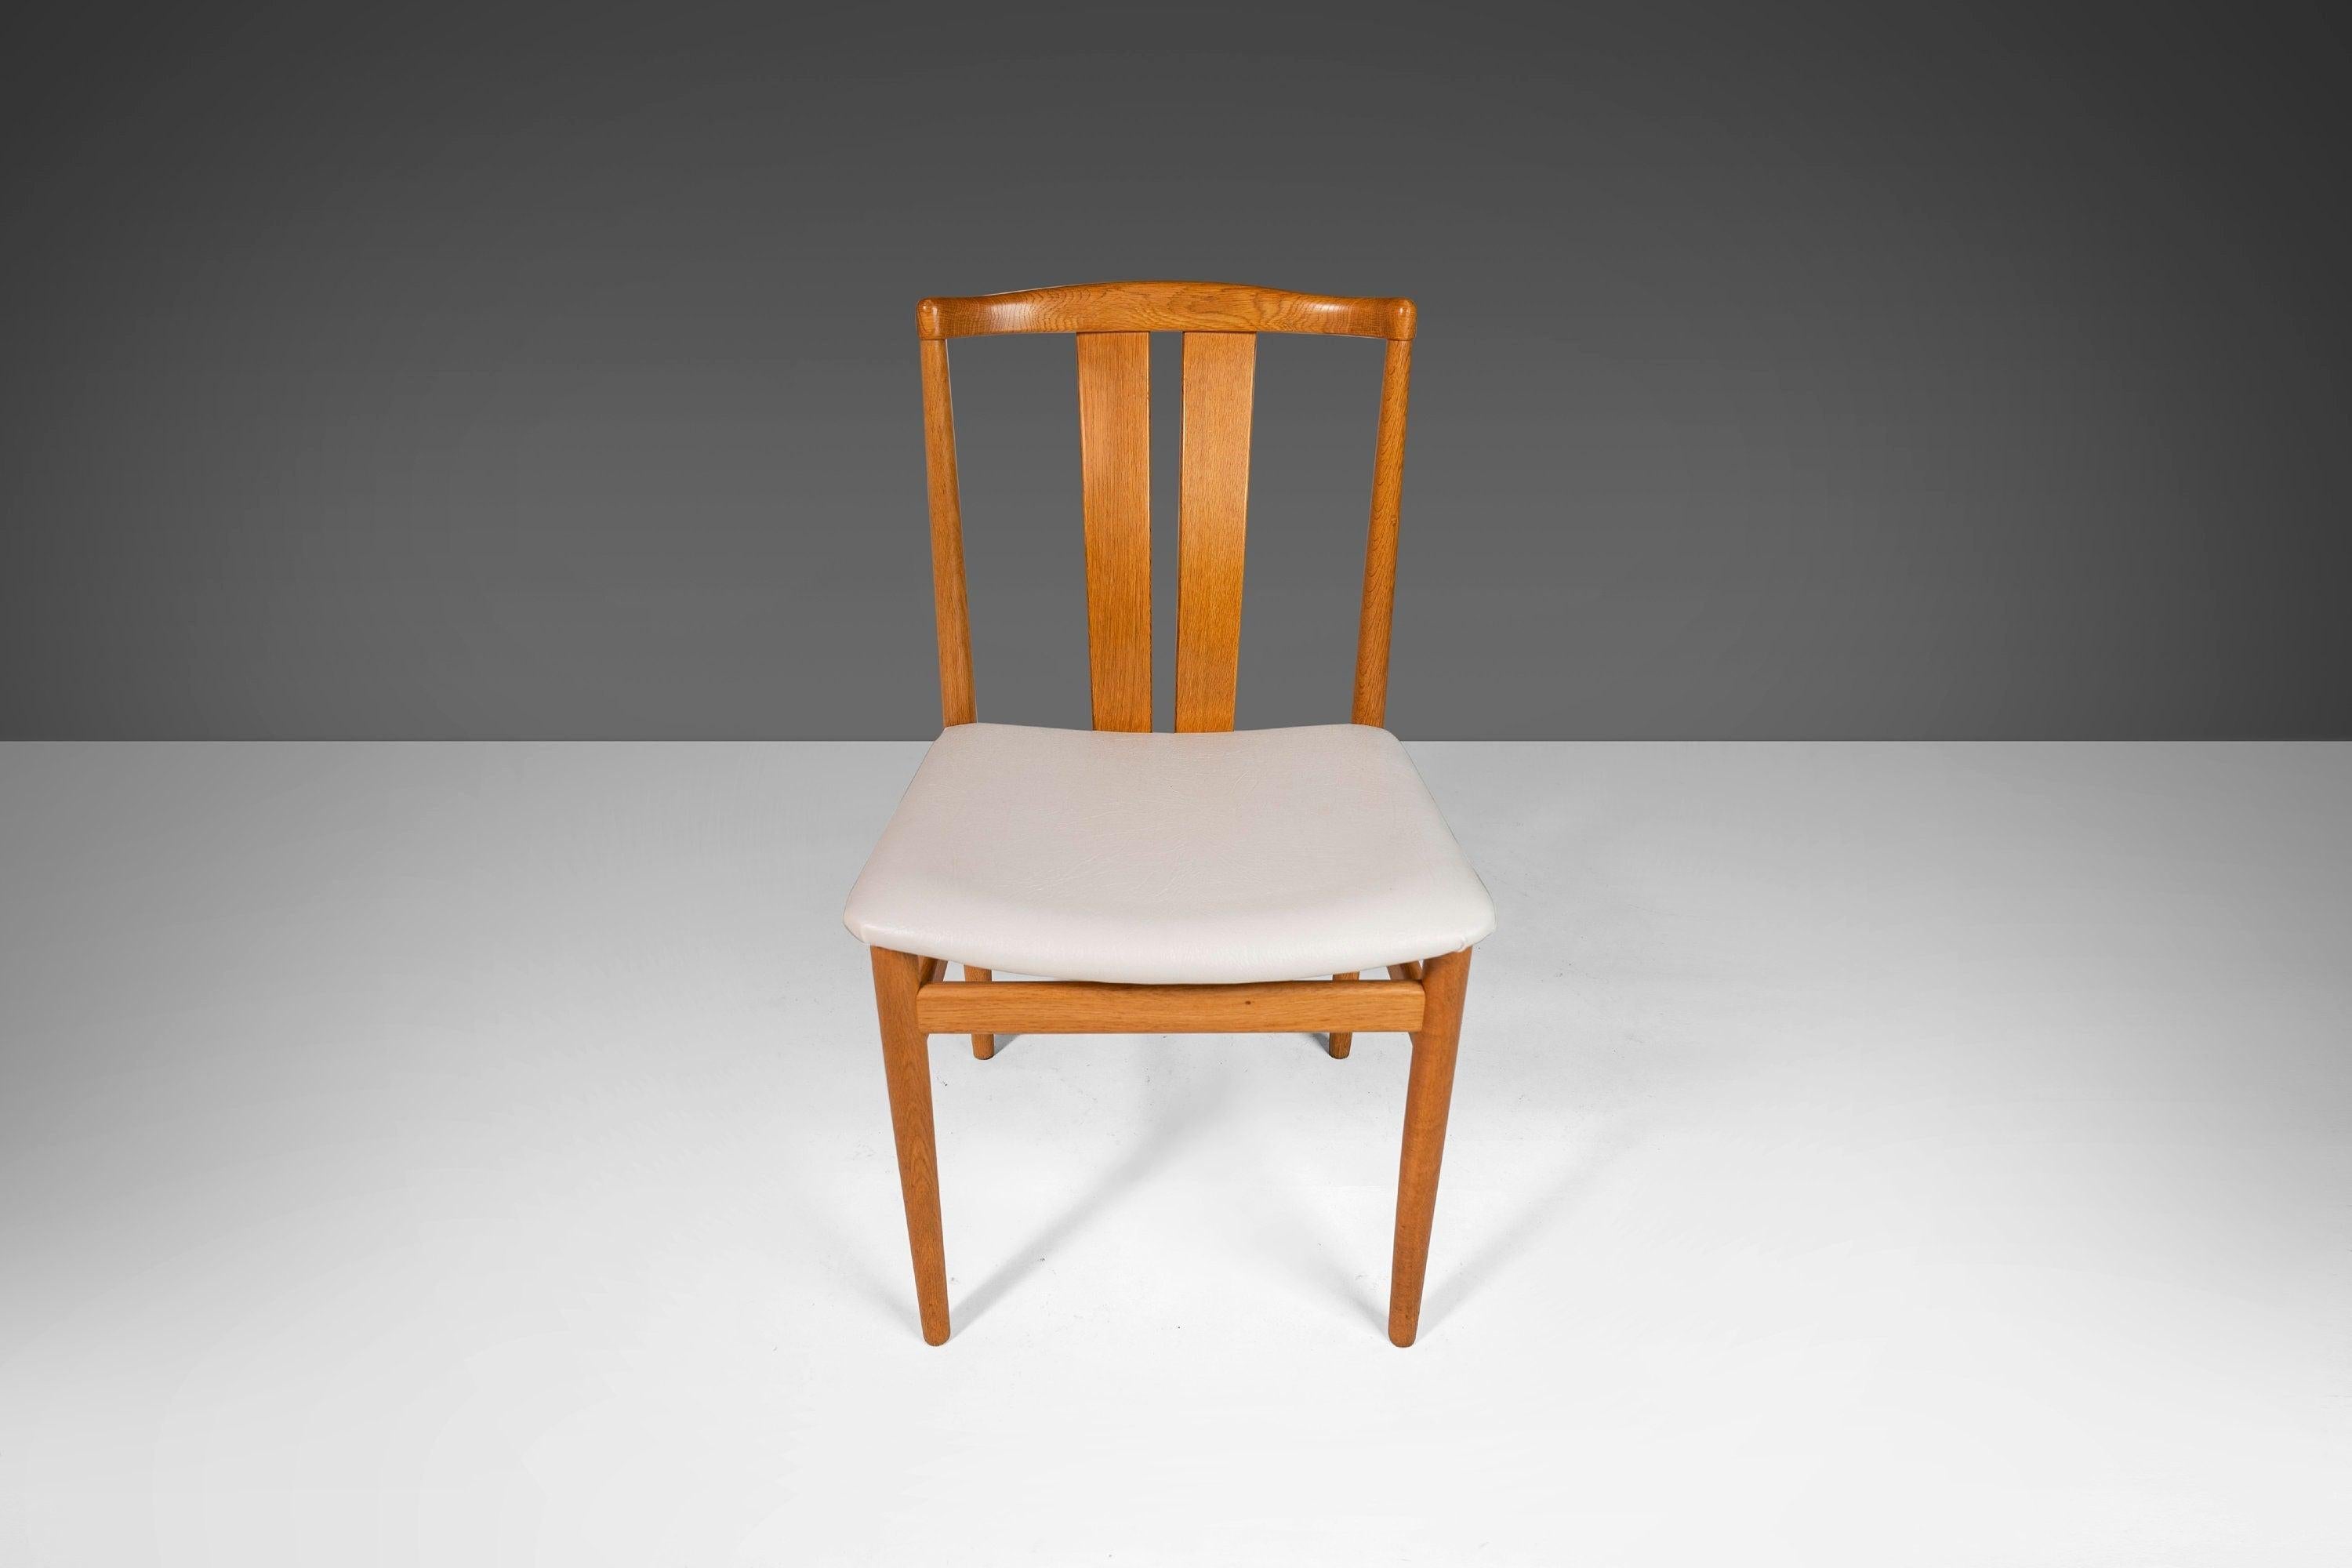 Set of Six (6) Danish Dining Chairs by Vamdrup Stolefabrik in Oak, c. 1970s For Sale 1